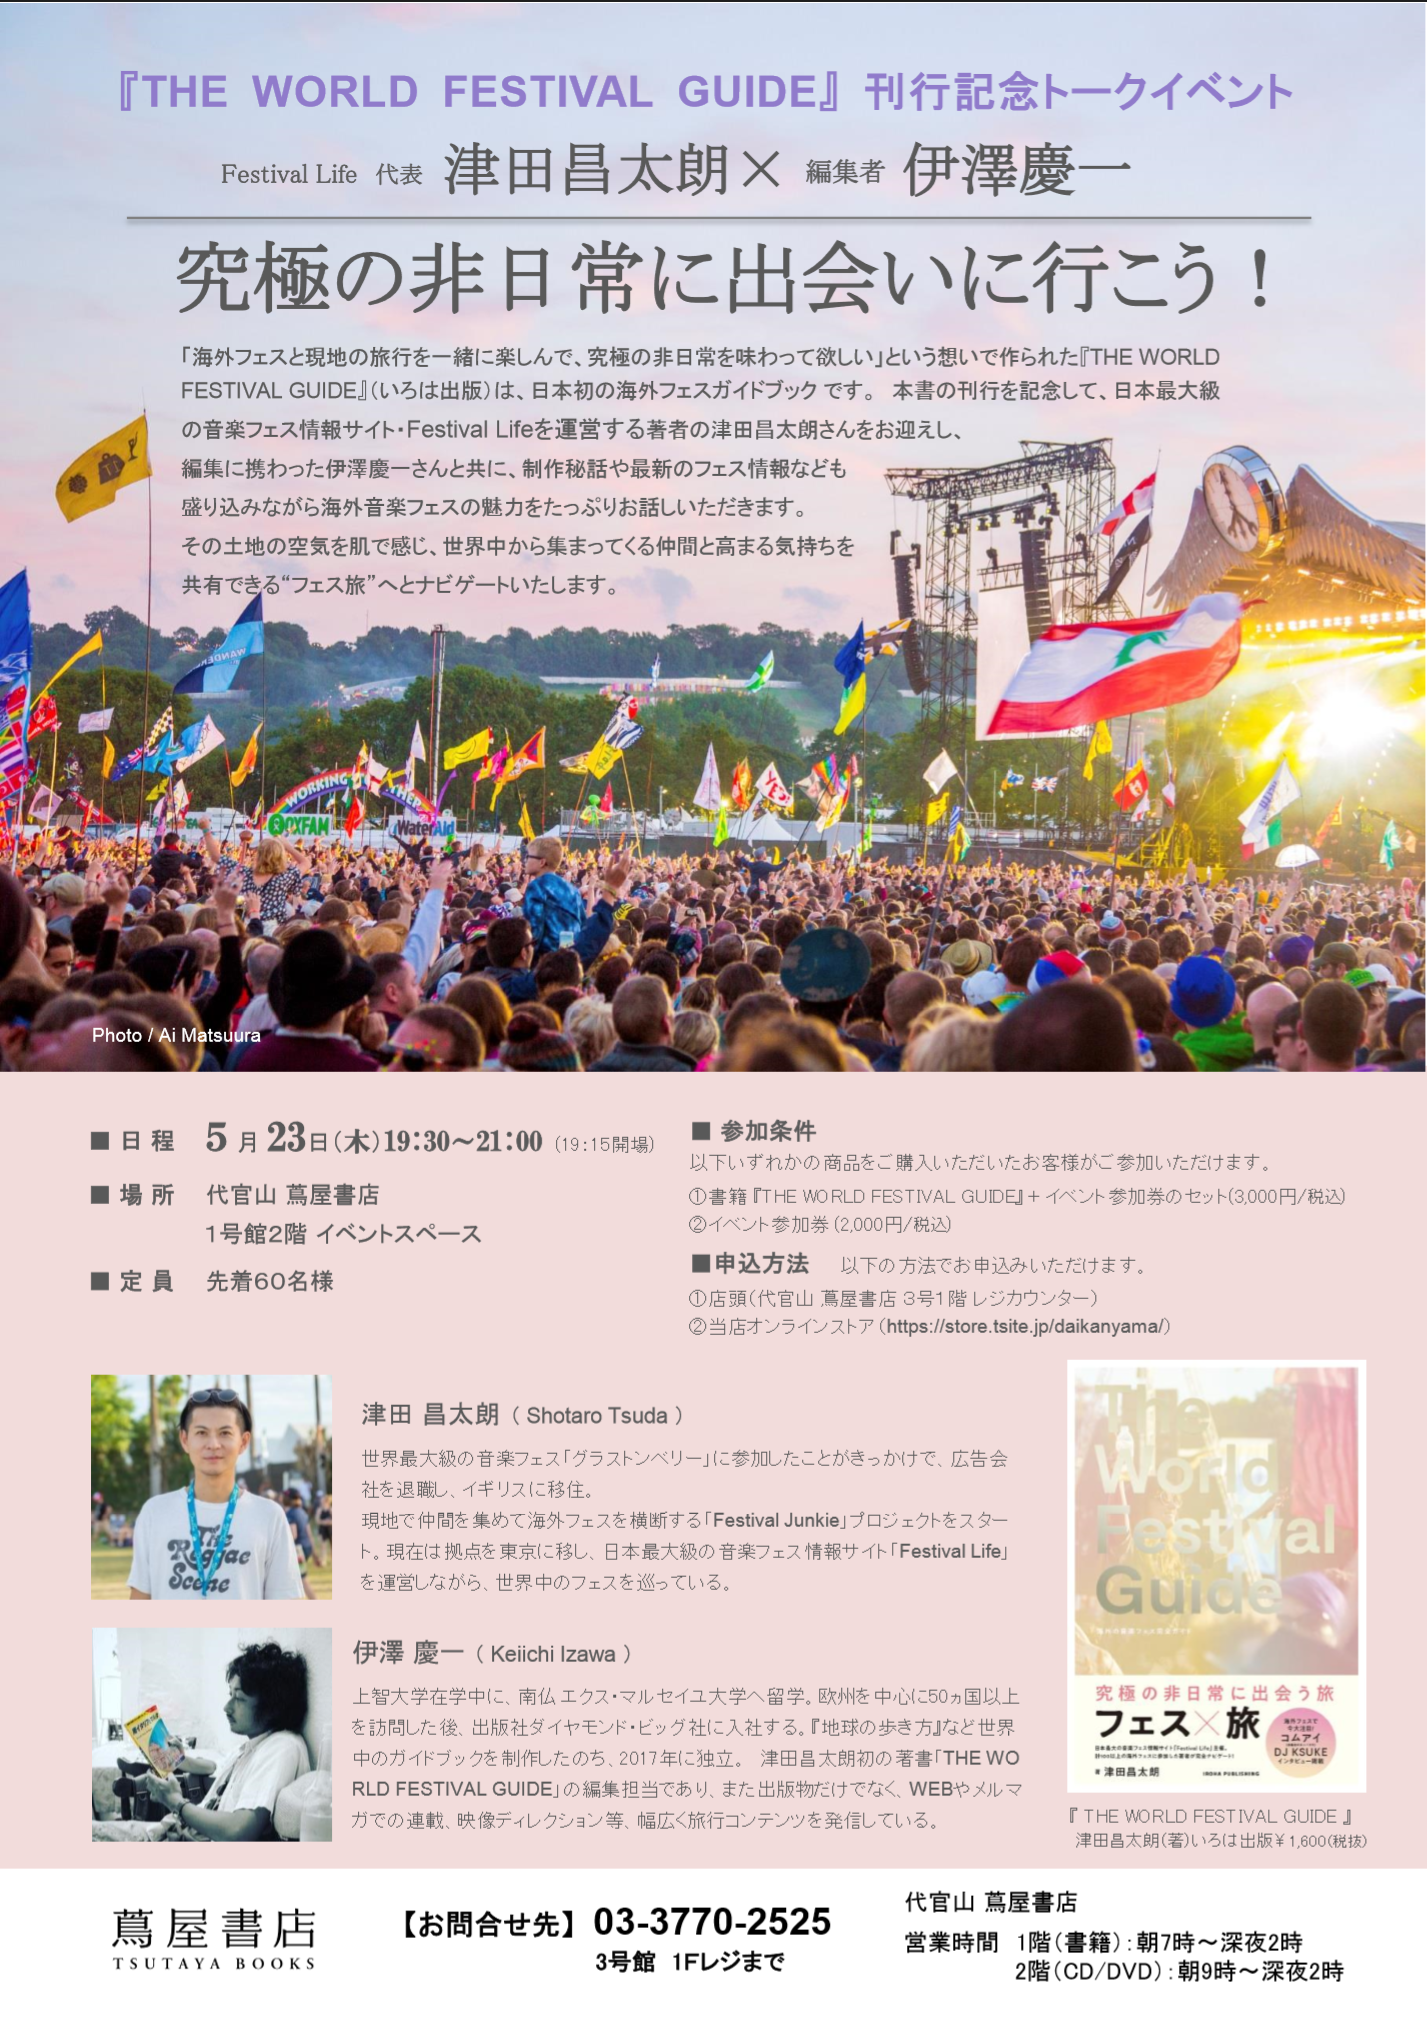 THE WORLD FESTIVAL GUIDE – 海外の音楽フェス完全ガイド』津田昌太朗×伊澤慶一 トークイベント@代官山蔦屋書店 |  いろは出版株式会社